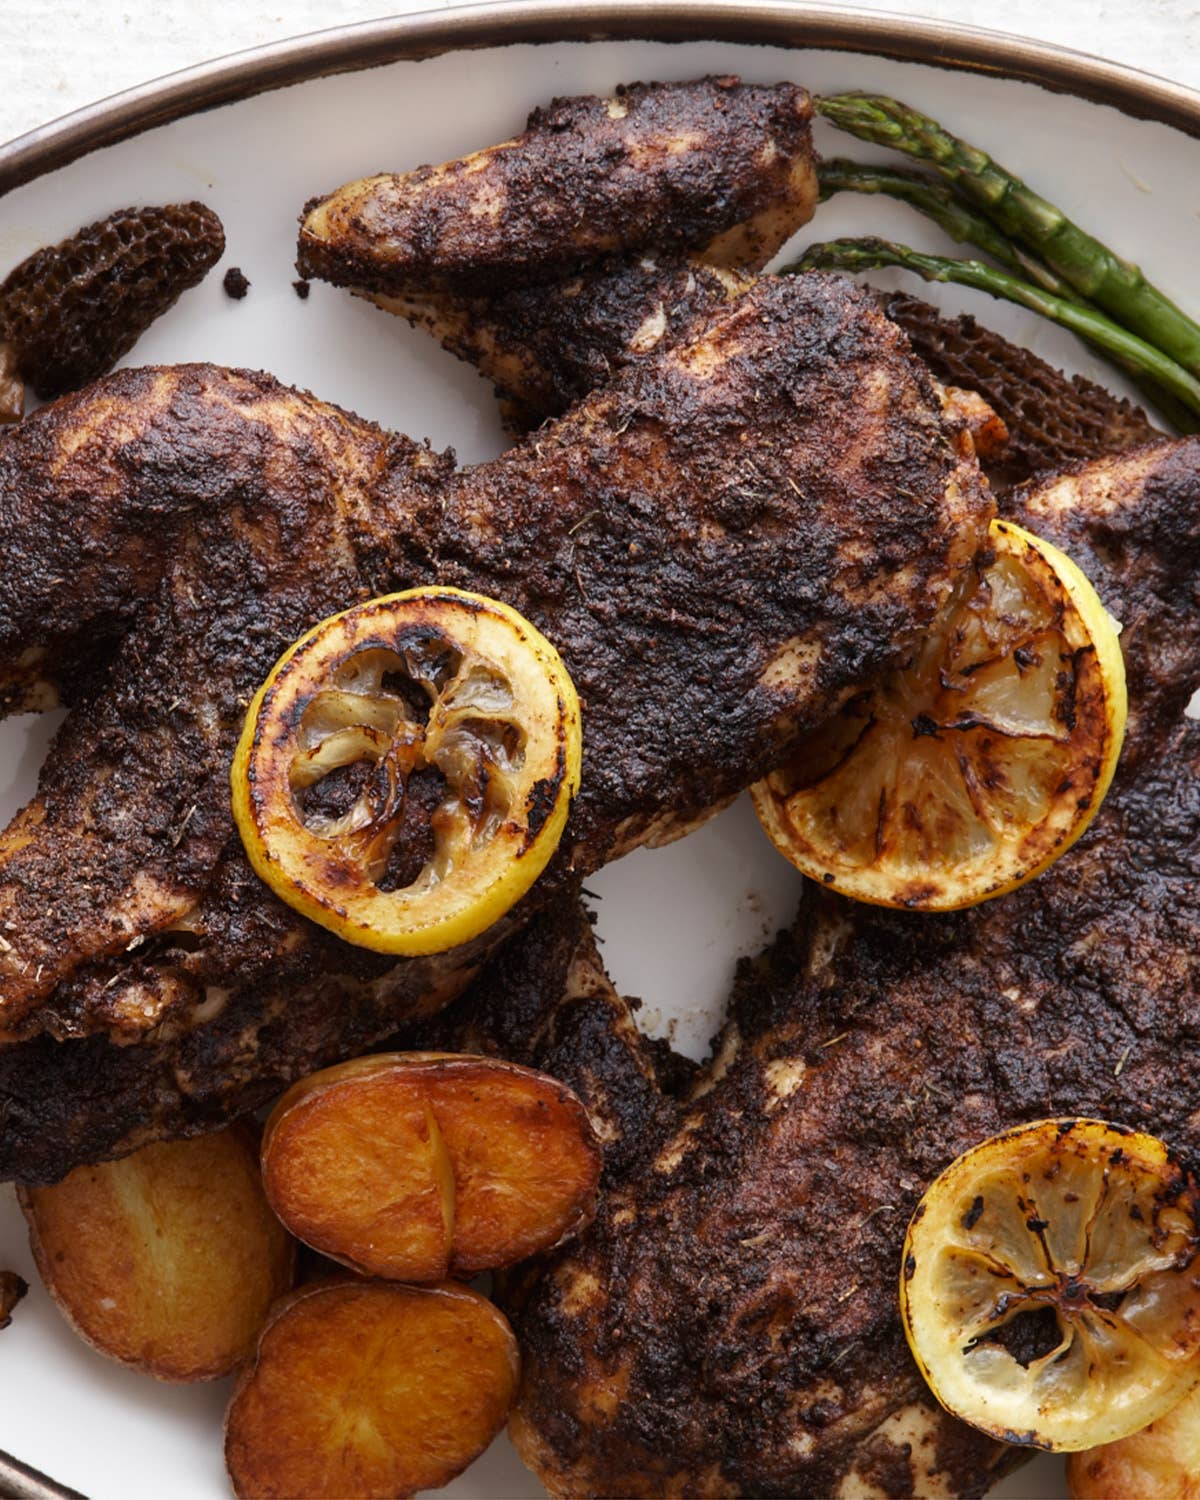 Morel-Rubbed Roasted Chicken